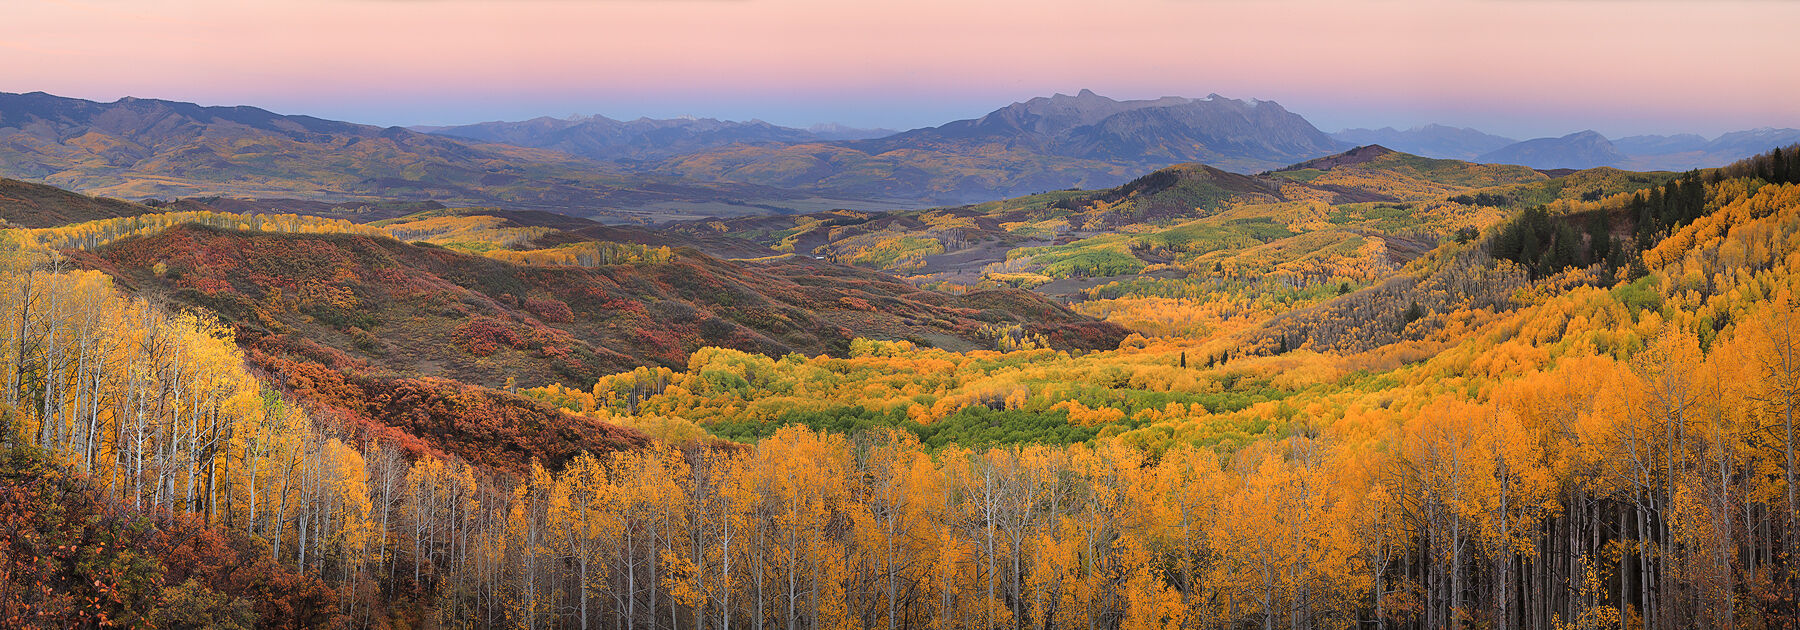 Mountains in the distance sit in a pink orange painted sky as the valley below is filled with yellow, orange and green aspens.